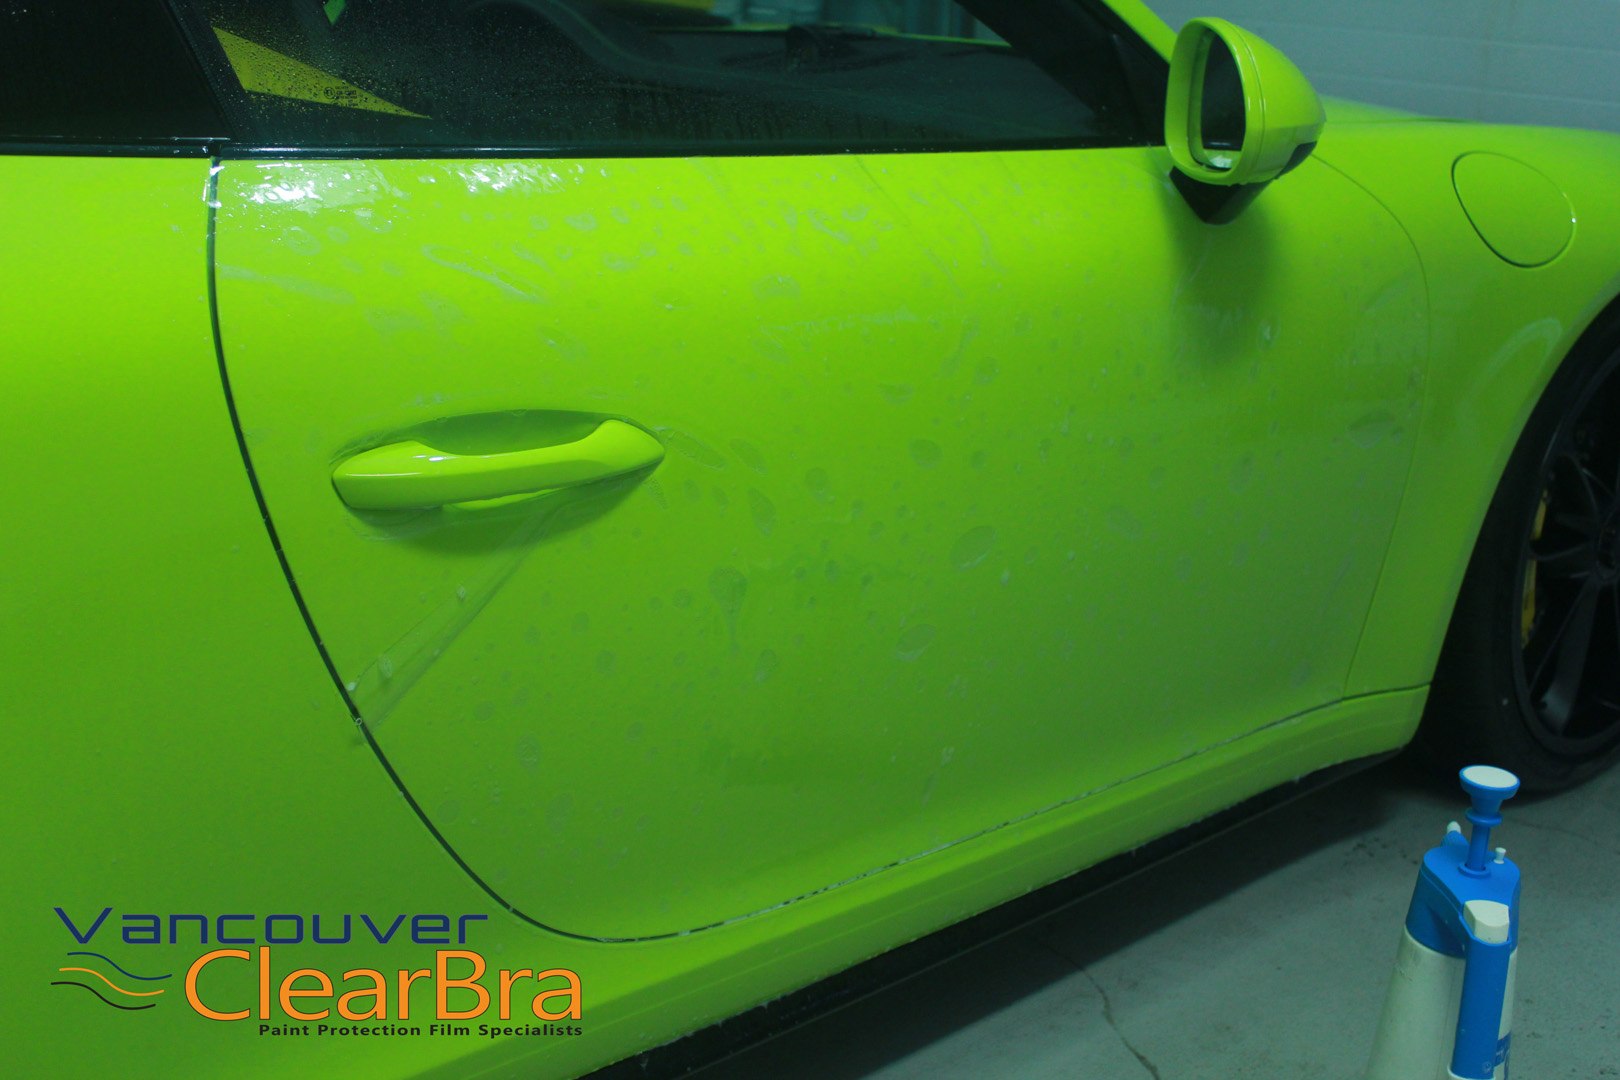 Halifax ClearBra - Halifax Clear Bra Paint Protection Film Xpel 3M